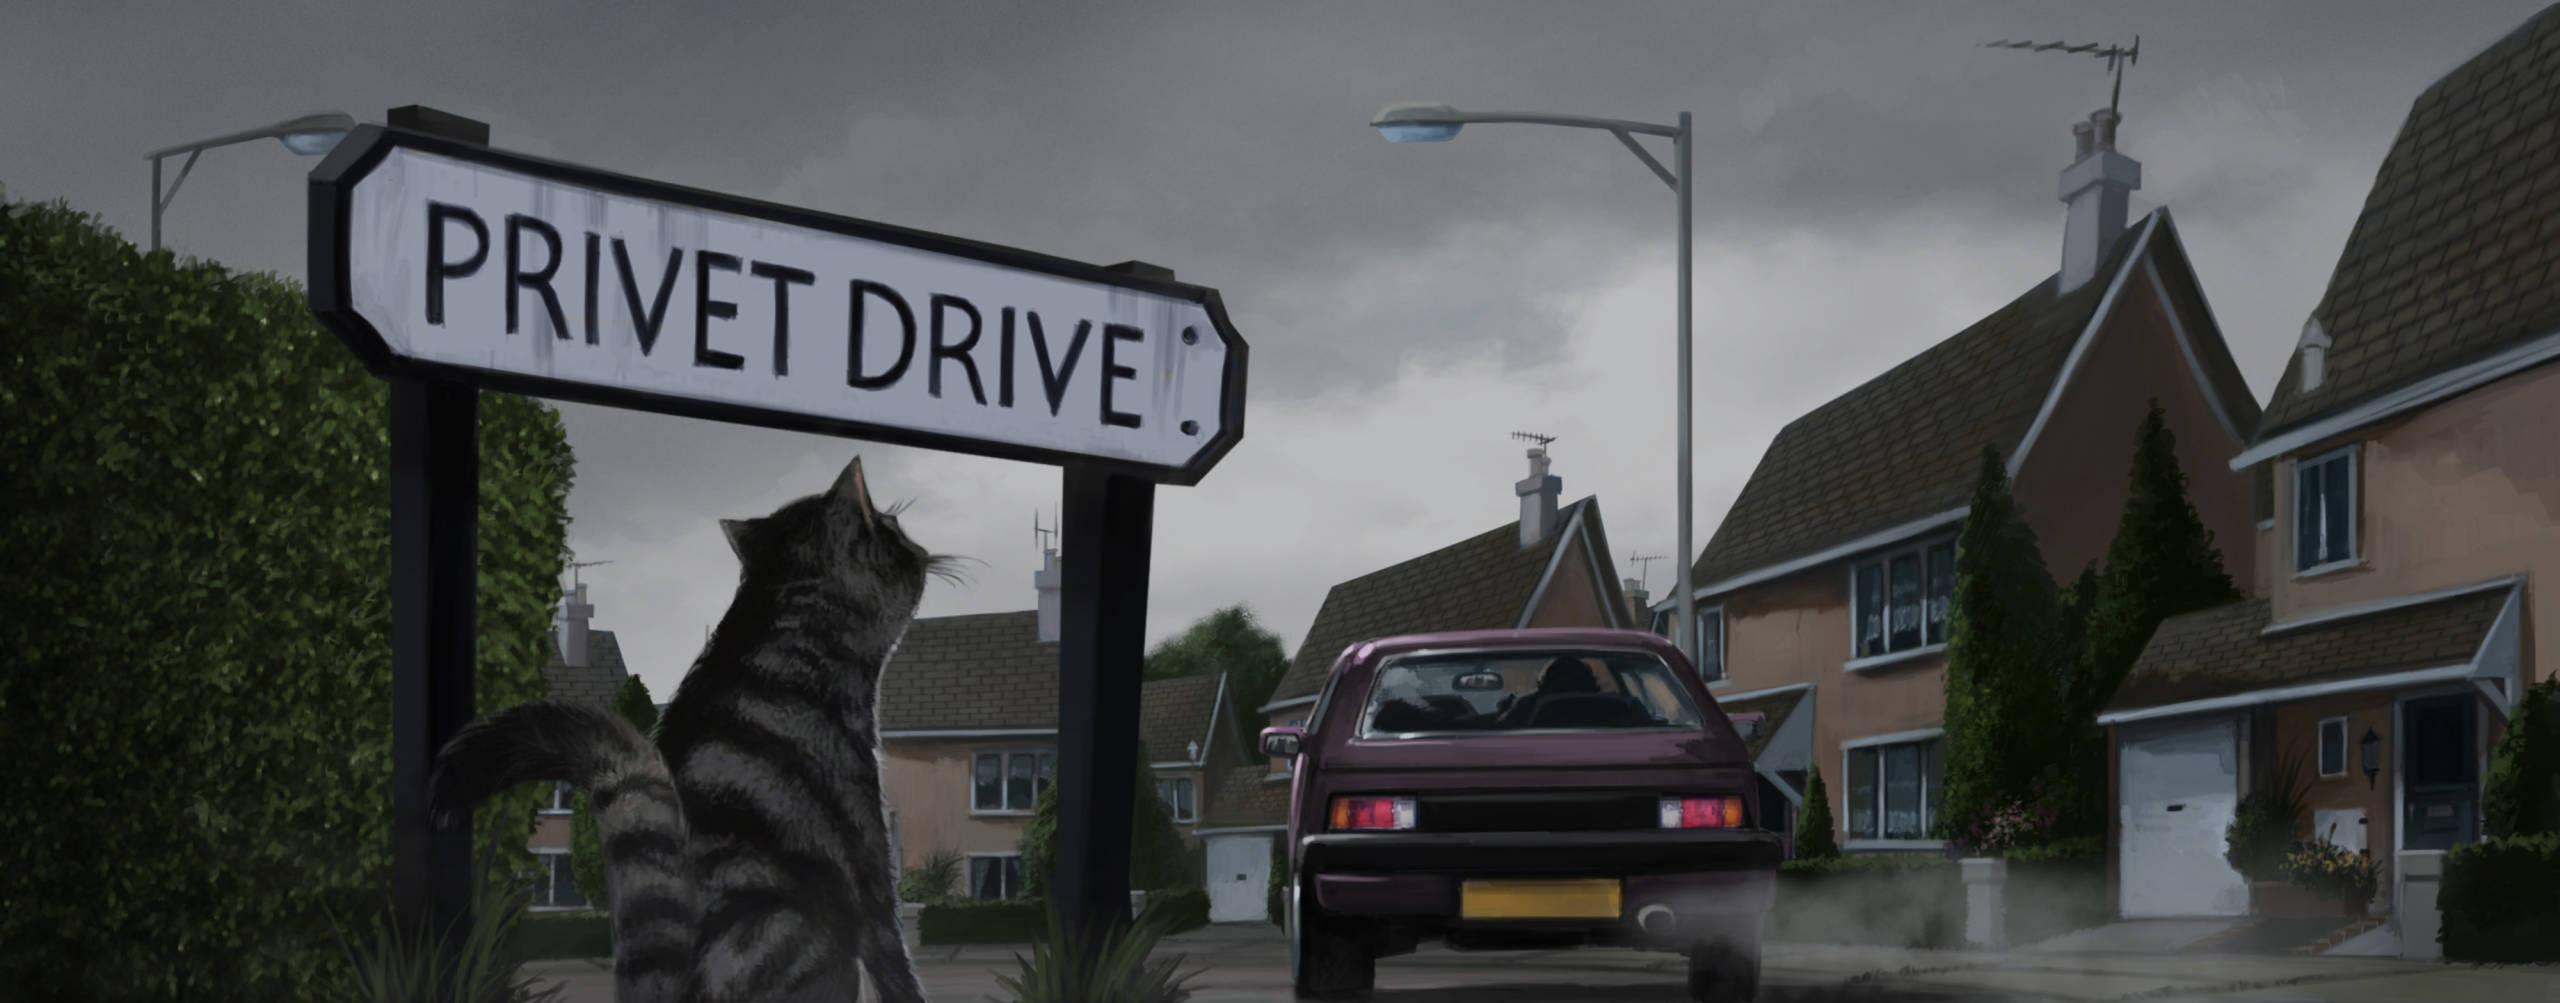 McGonagall stands outside Privet drive disguised as a cat